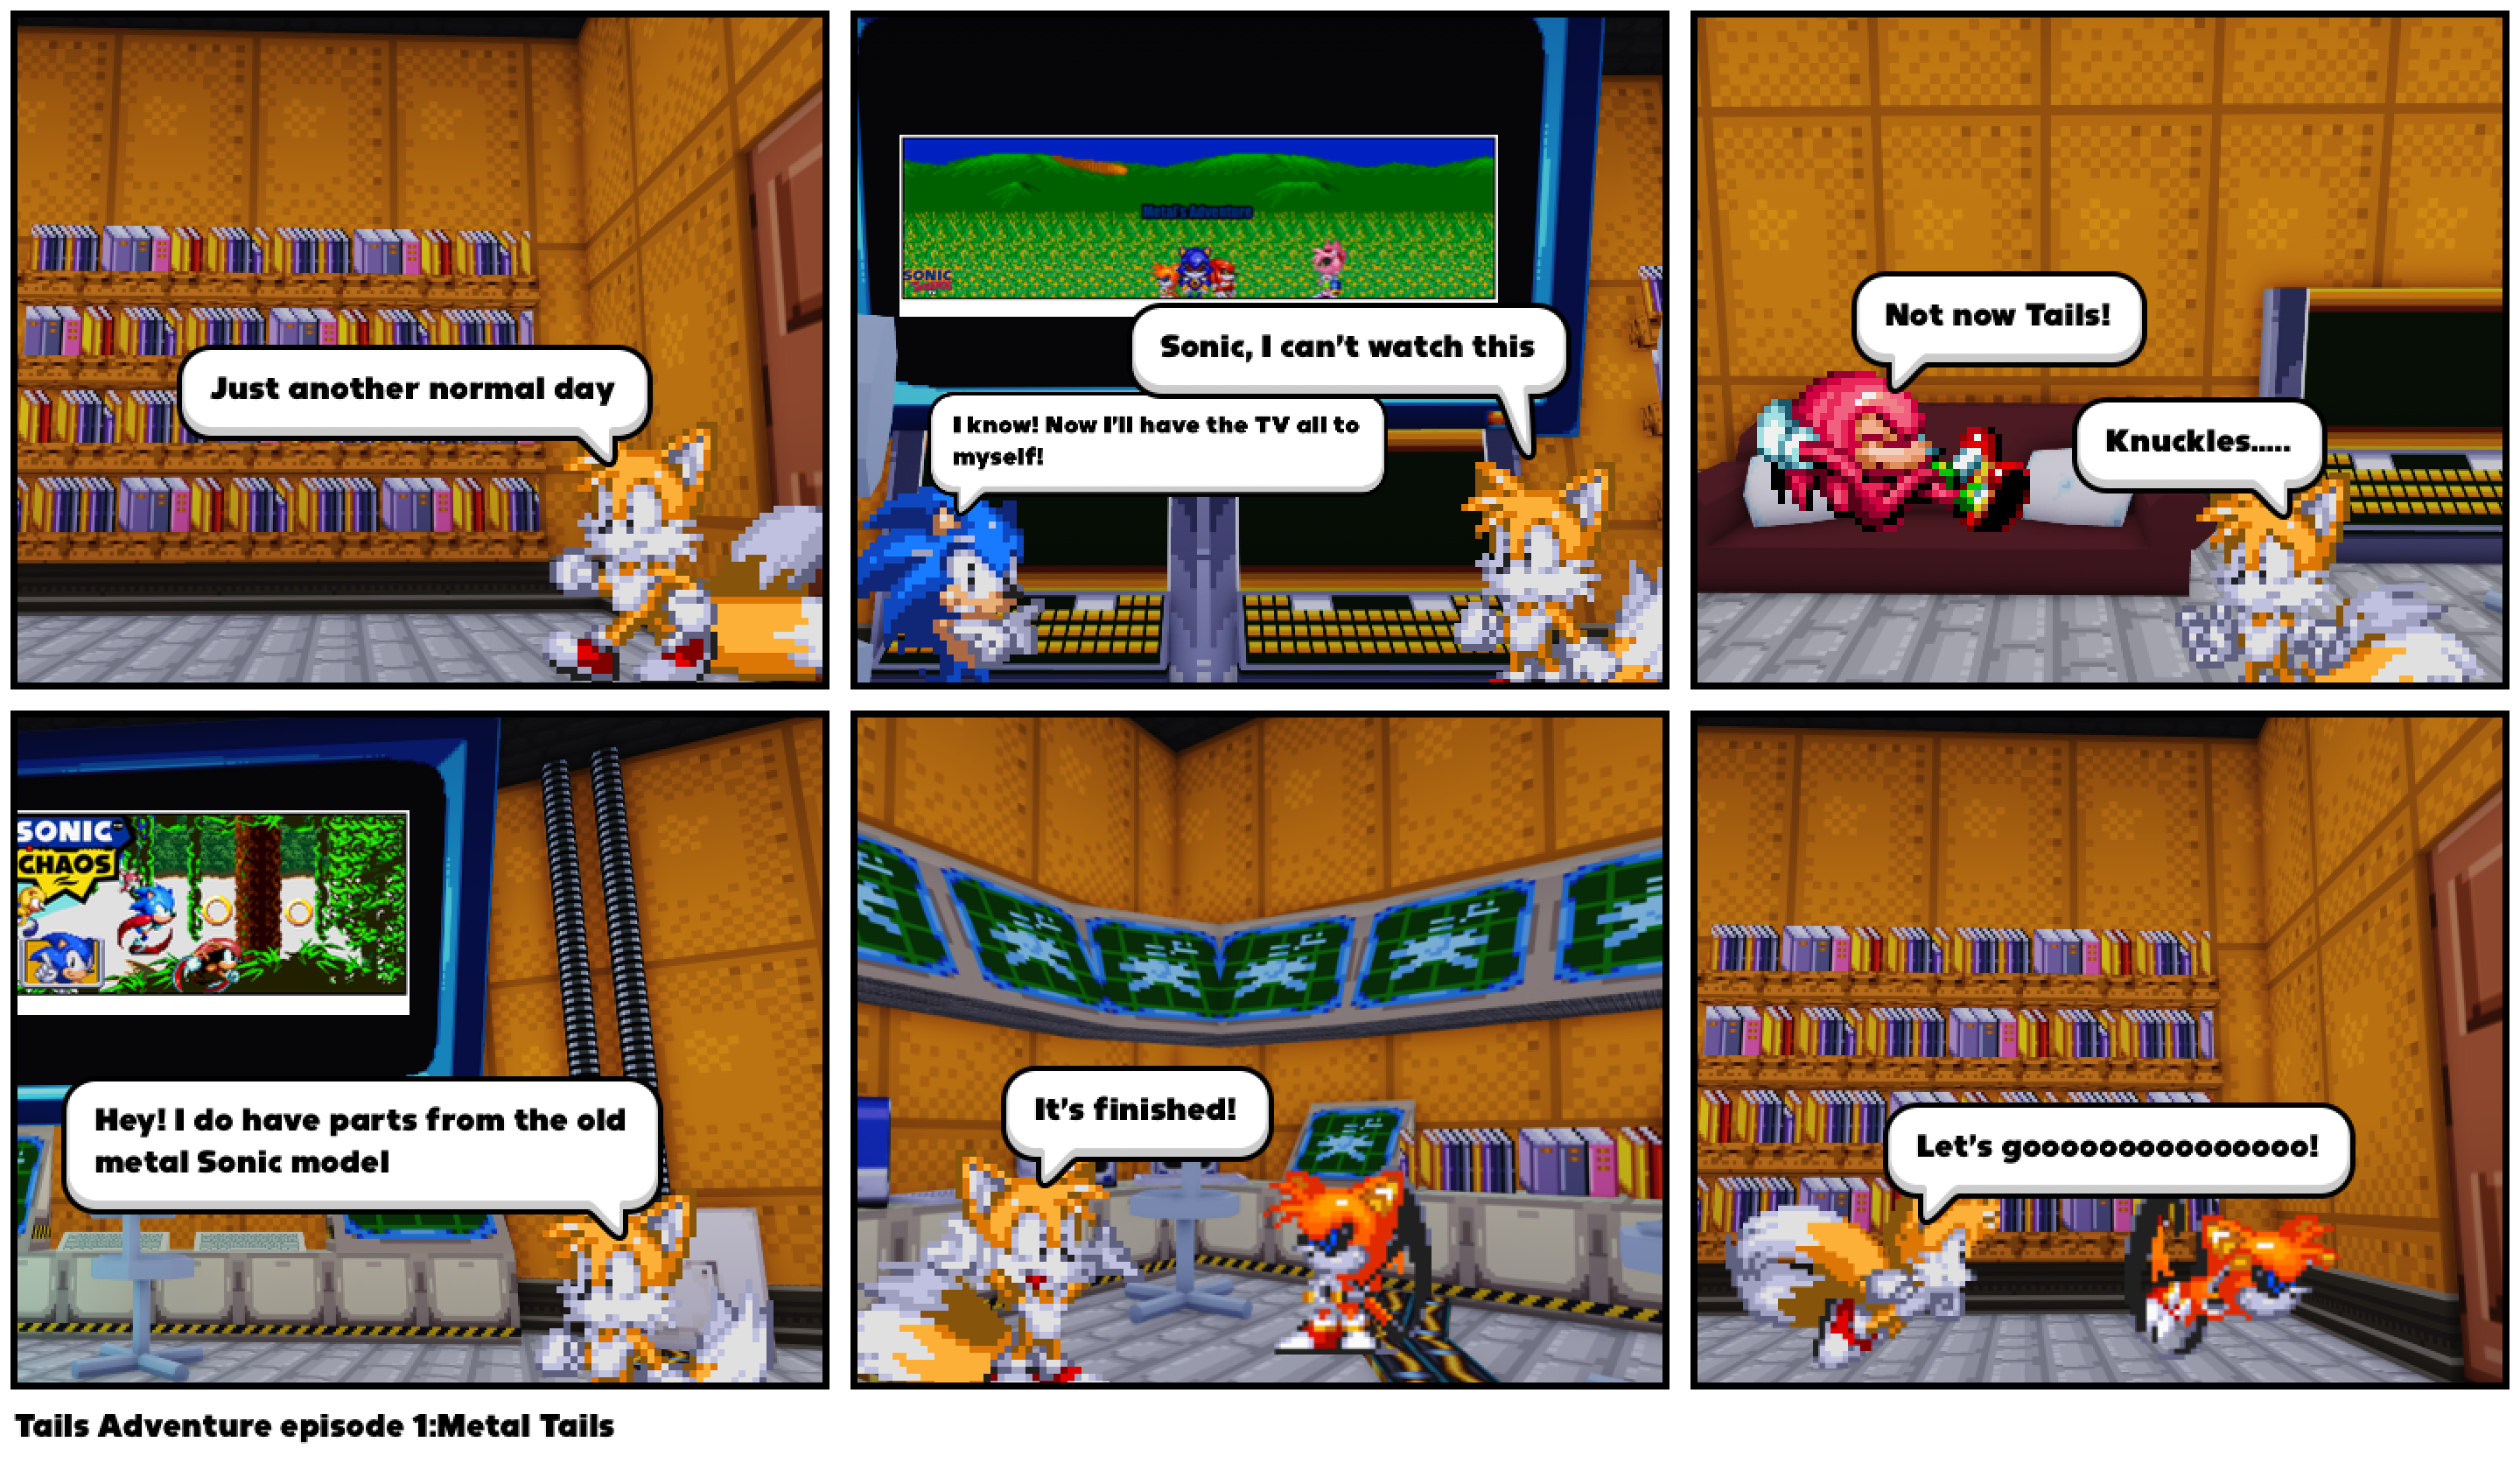 Tails Adventure episode 1:Metal Tails